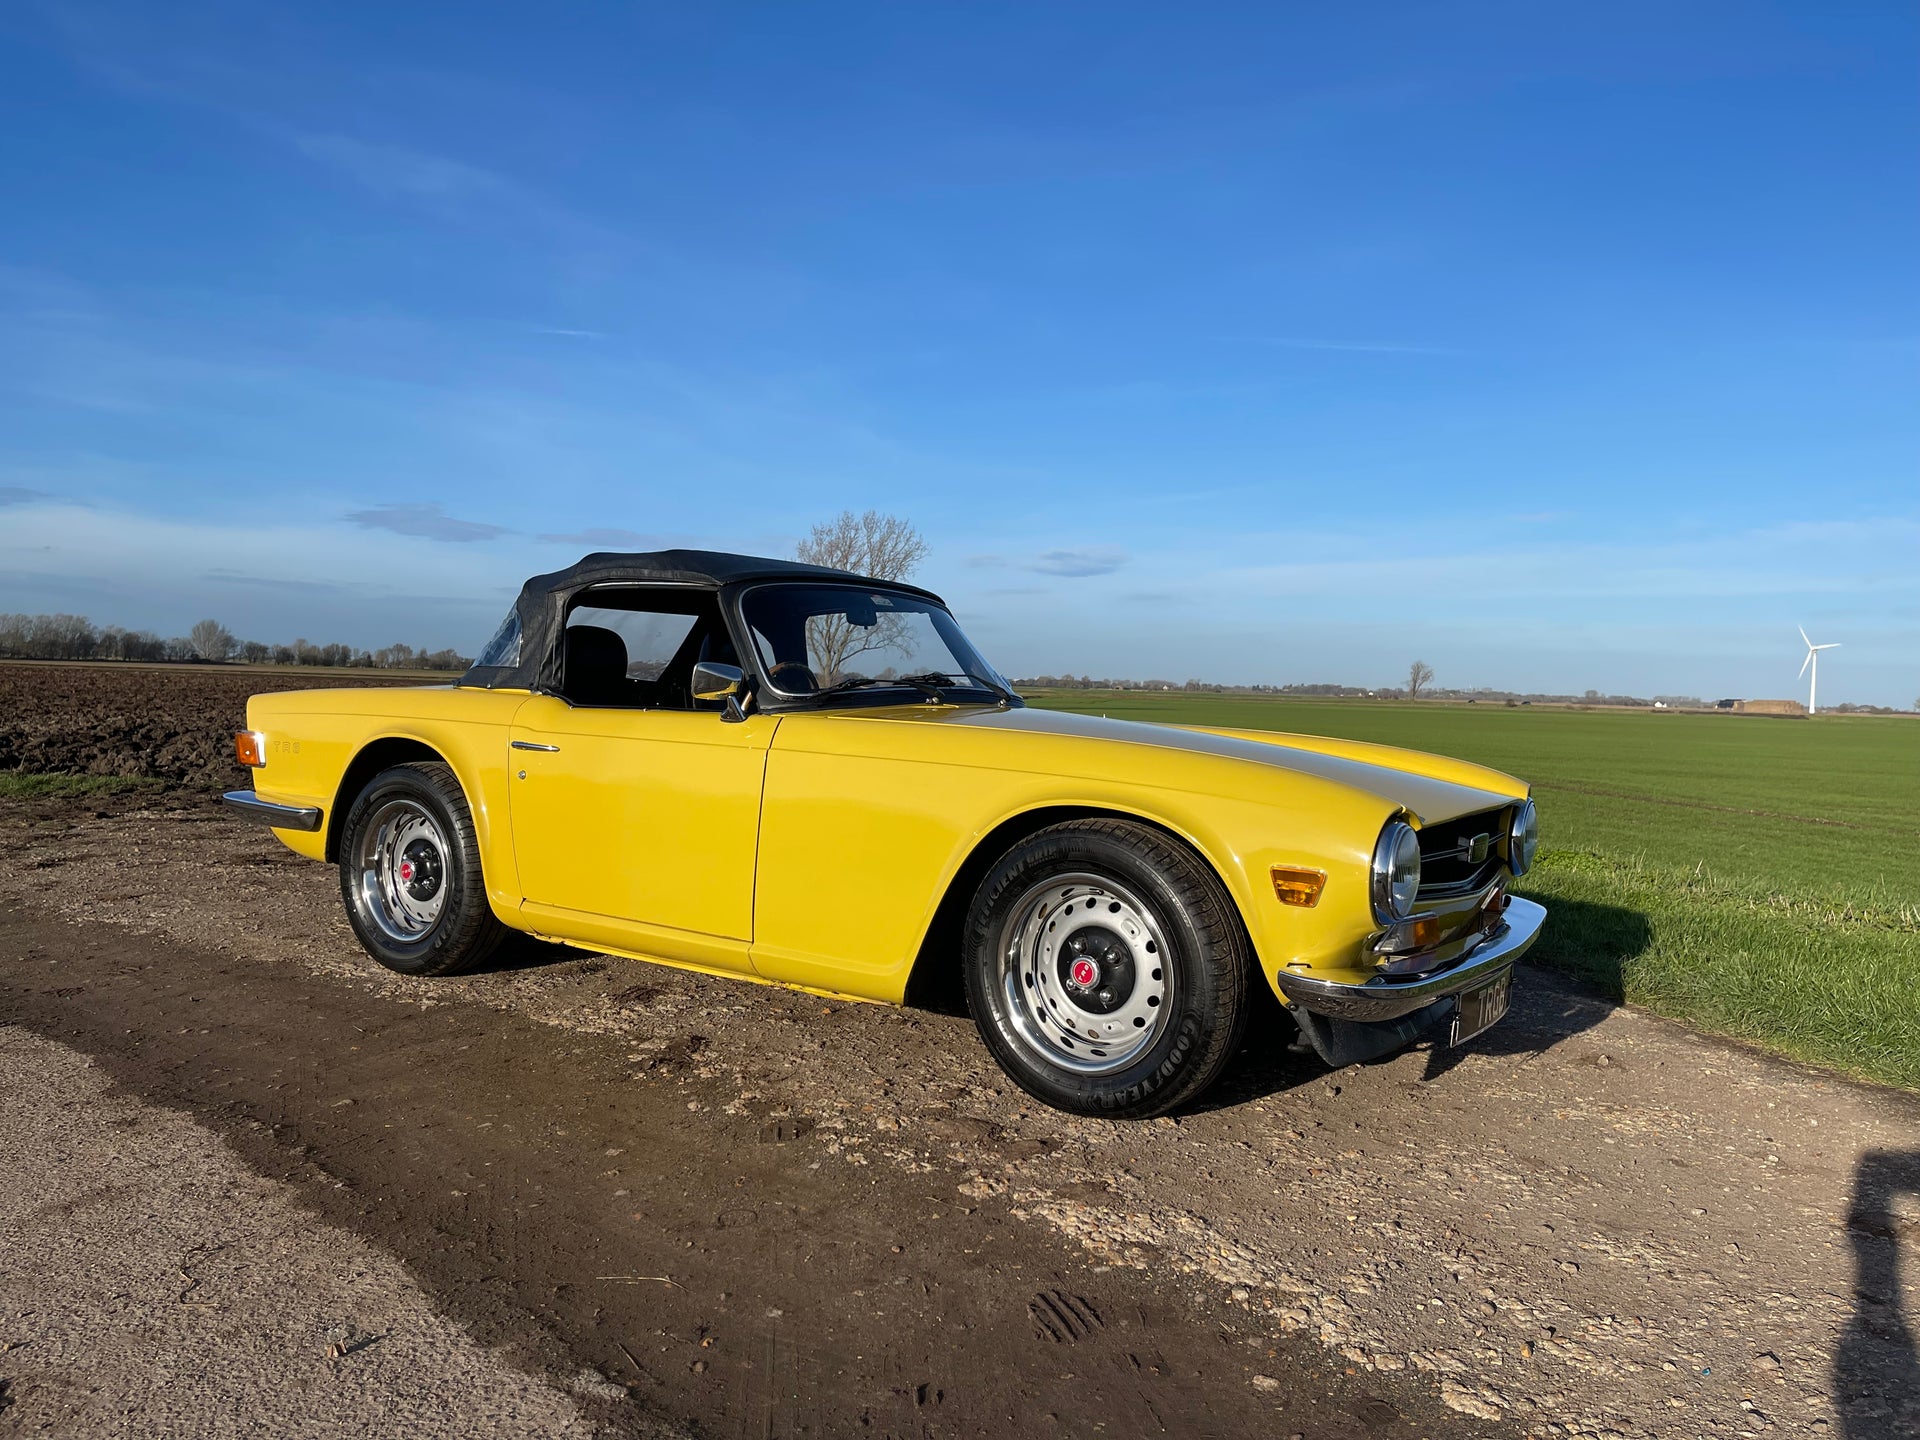 1969 TRIUMPH TR6 EFI WITH OVERDRIVE